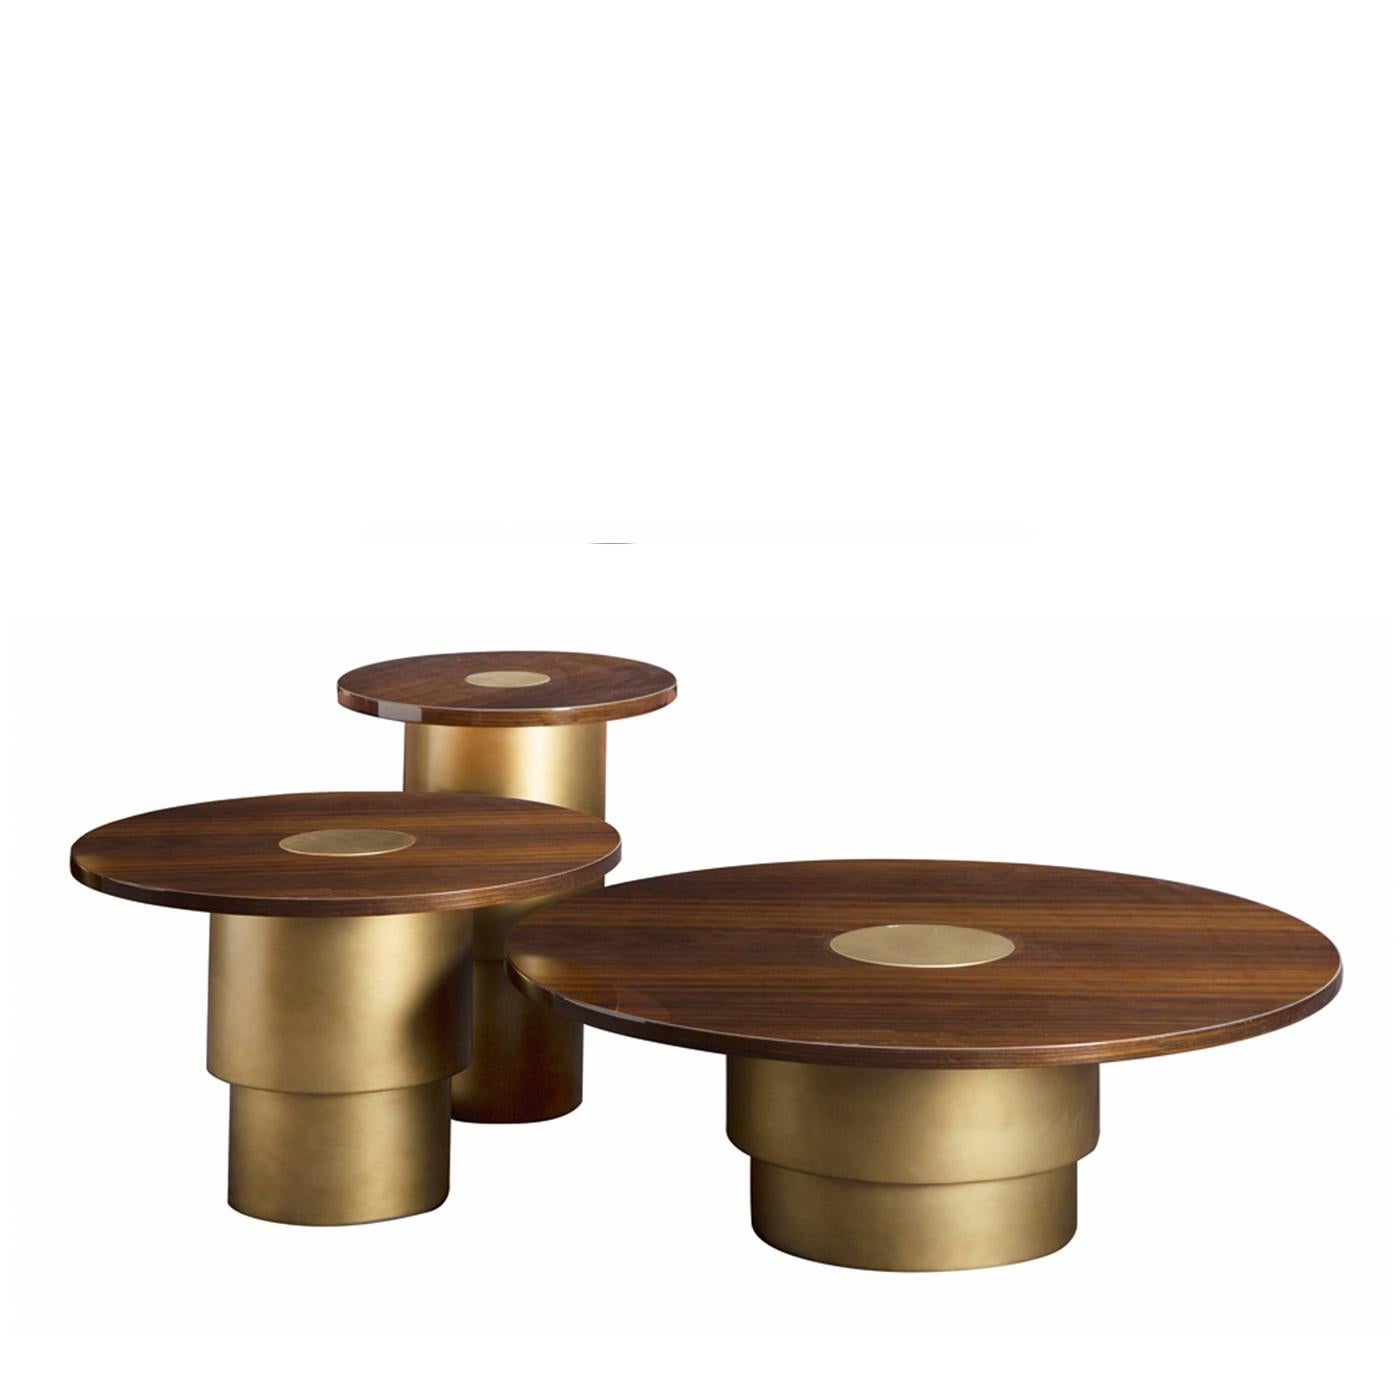 With a turned solid wood base finished in a burnished brass effect, the set of 3 Rondò coffee tables offers elements of warmth and functionality to your home. The plywood top features a dark walnut veneer and a unique central circle finished in